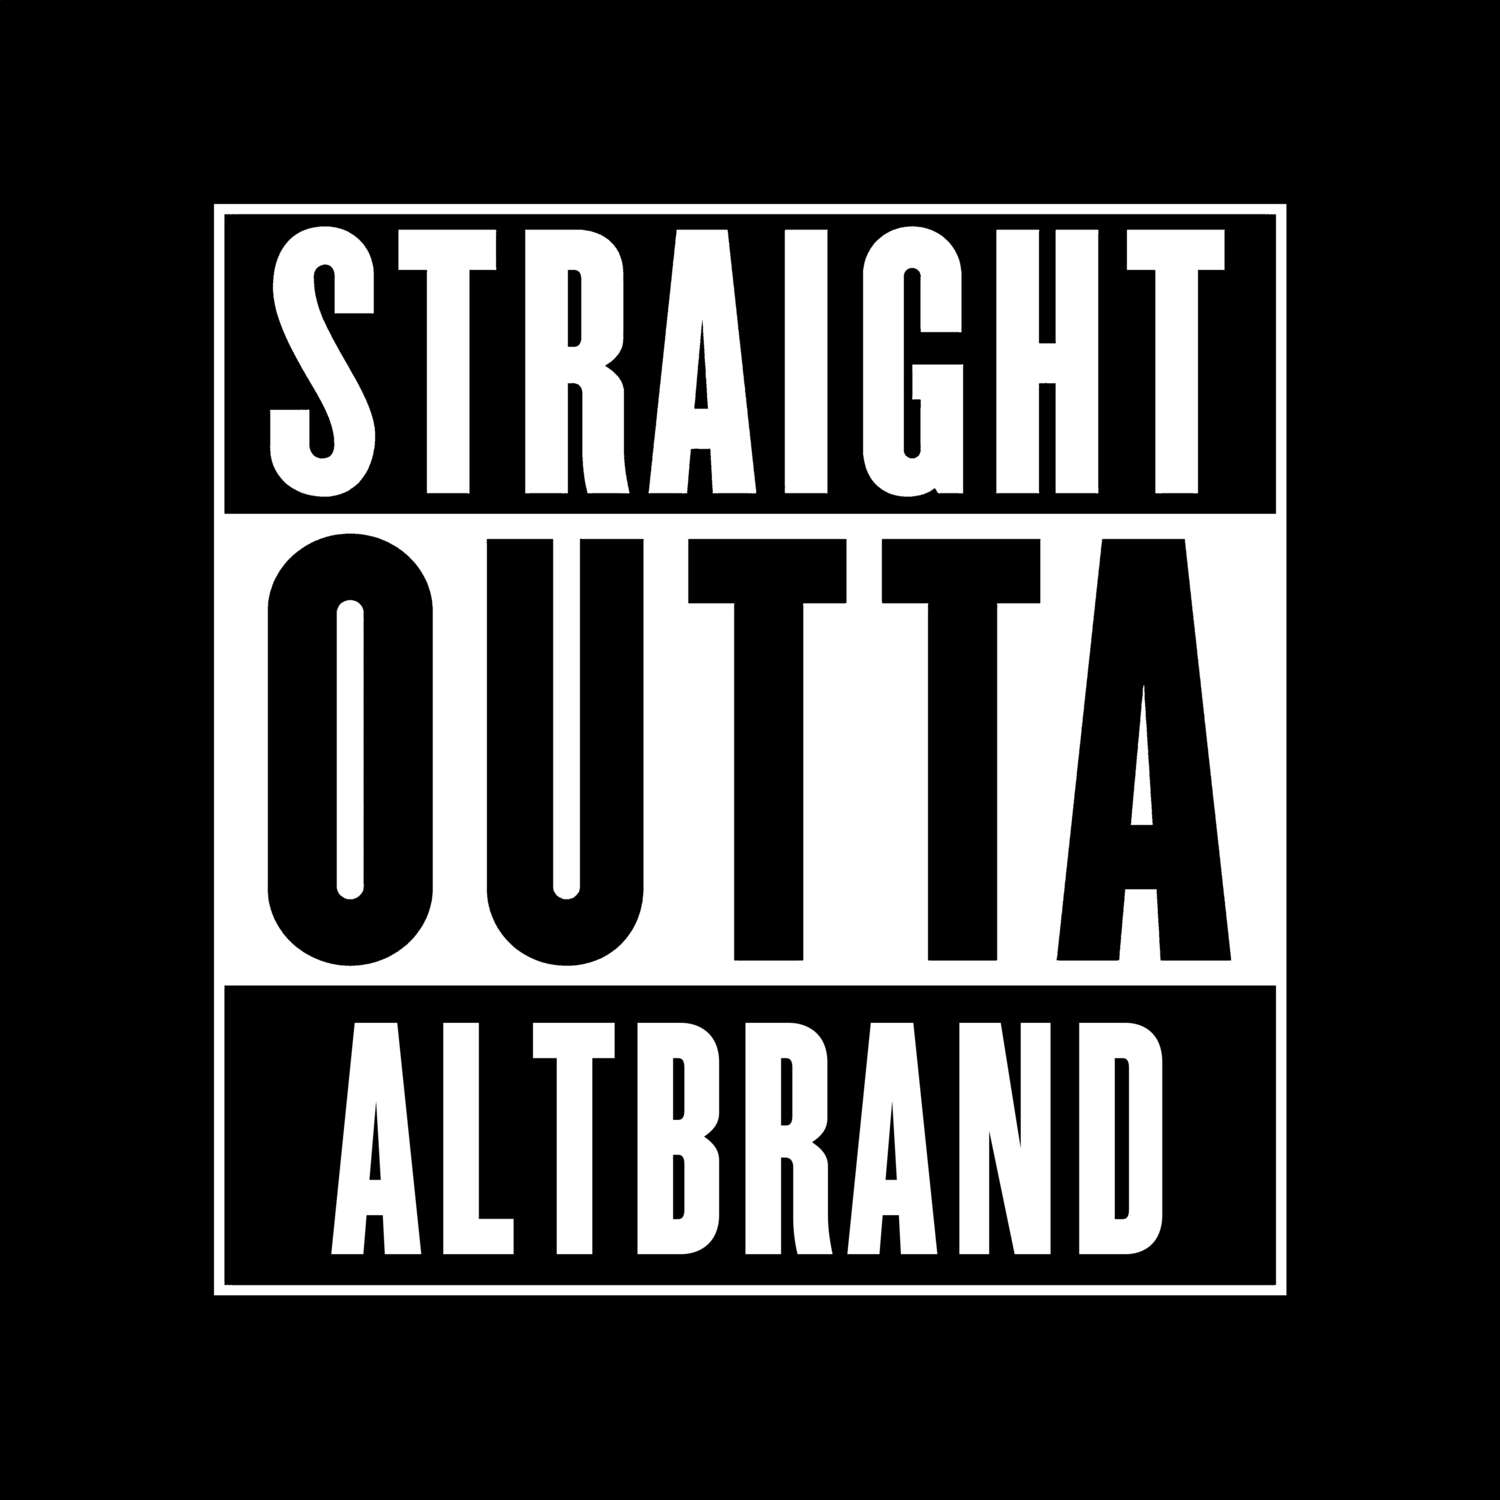 Altbrand T-Shirt »Straight Outta«